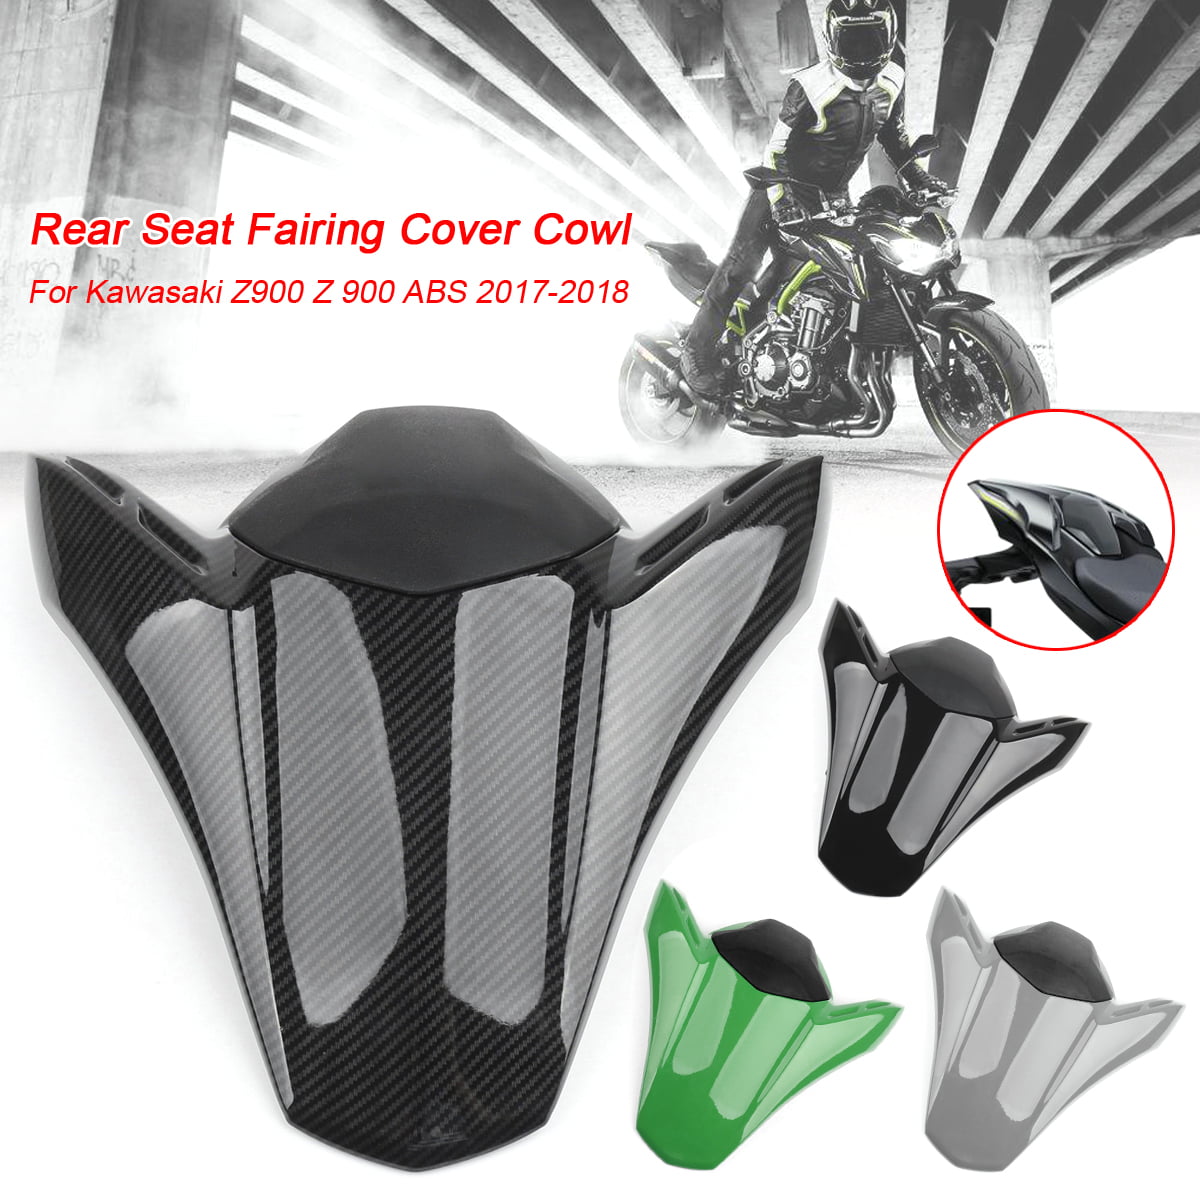 Areyourshop ABS Rear Seat Fairing Cover Cowl Fits for Z900 Z ABS 2017-2020 Black 